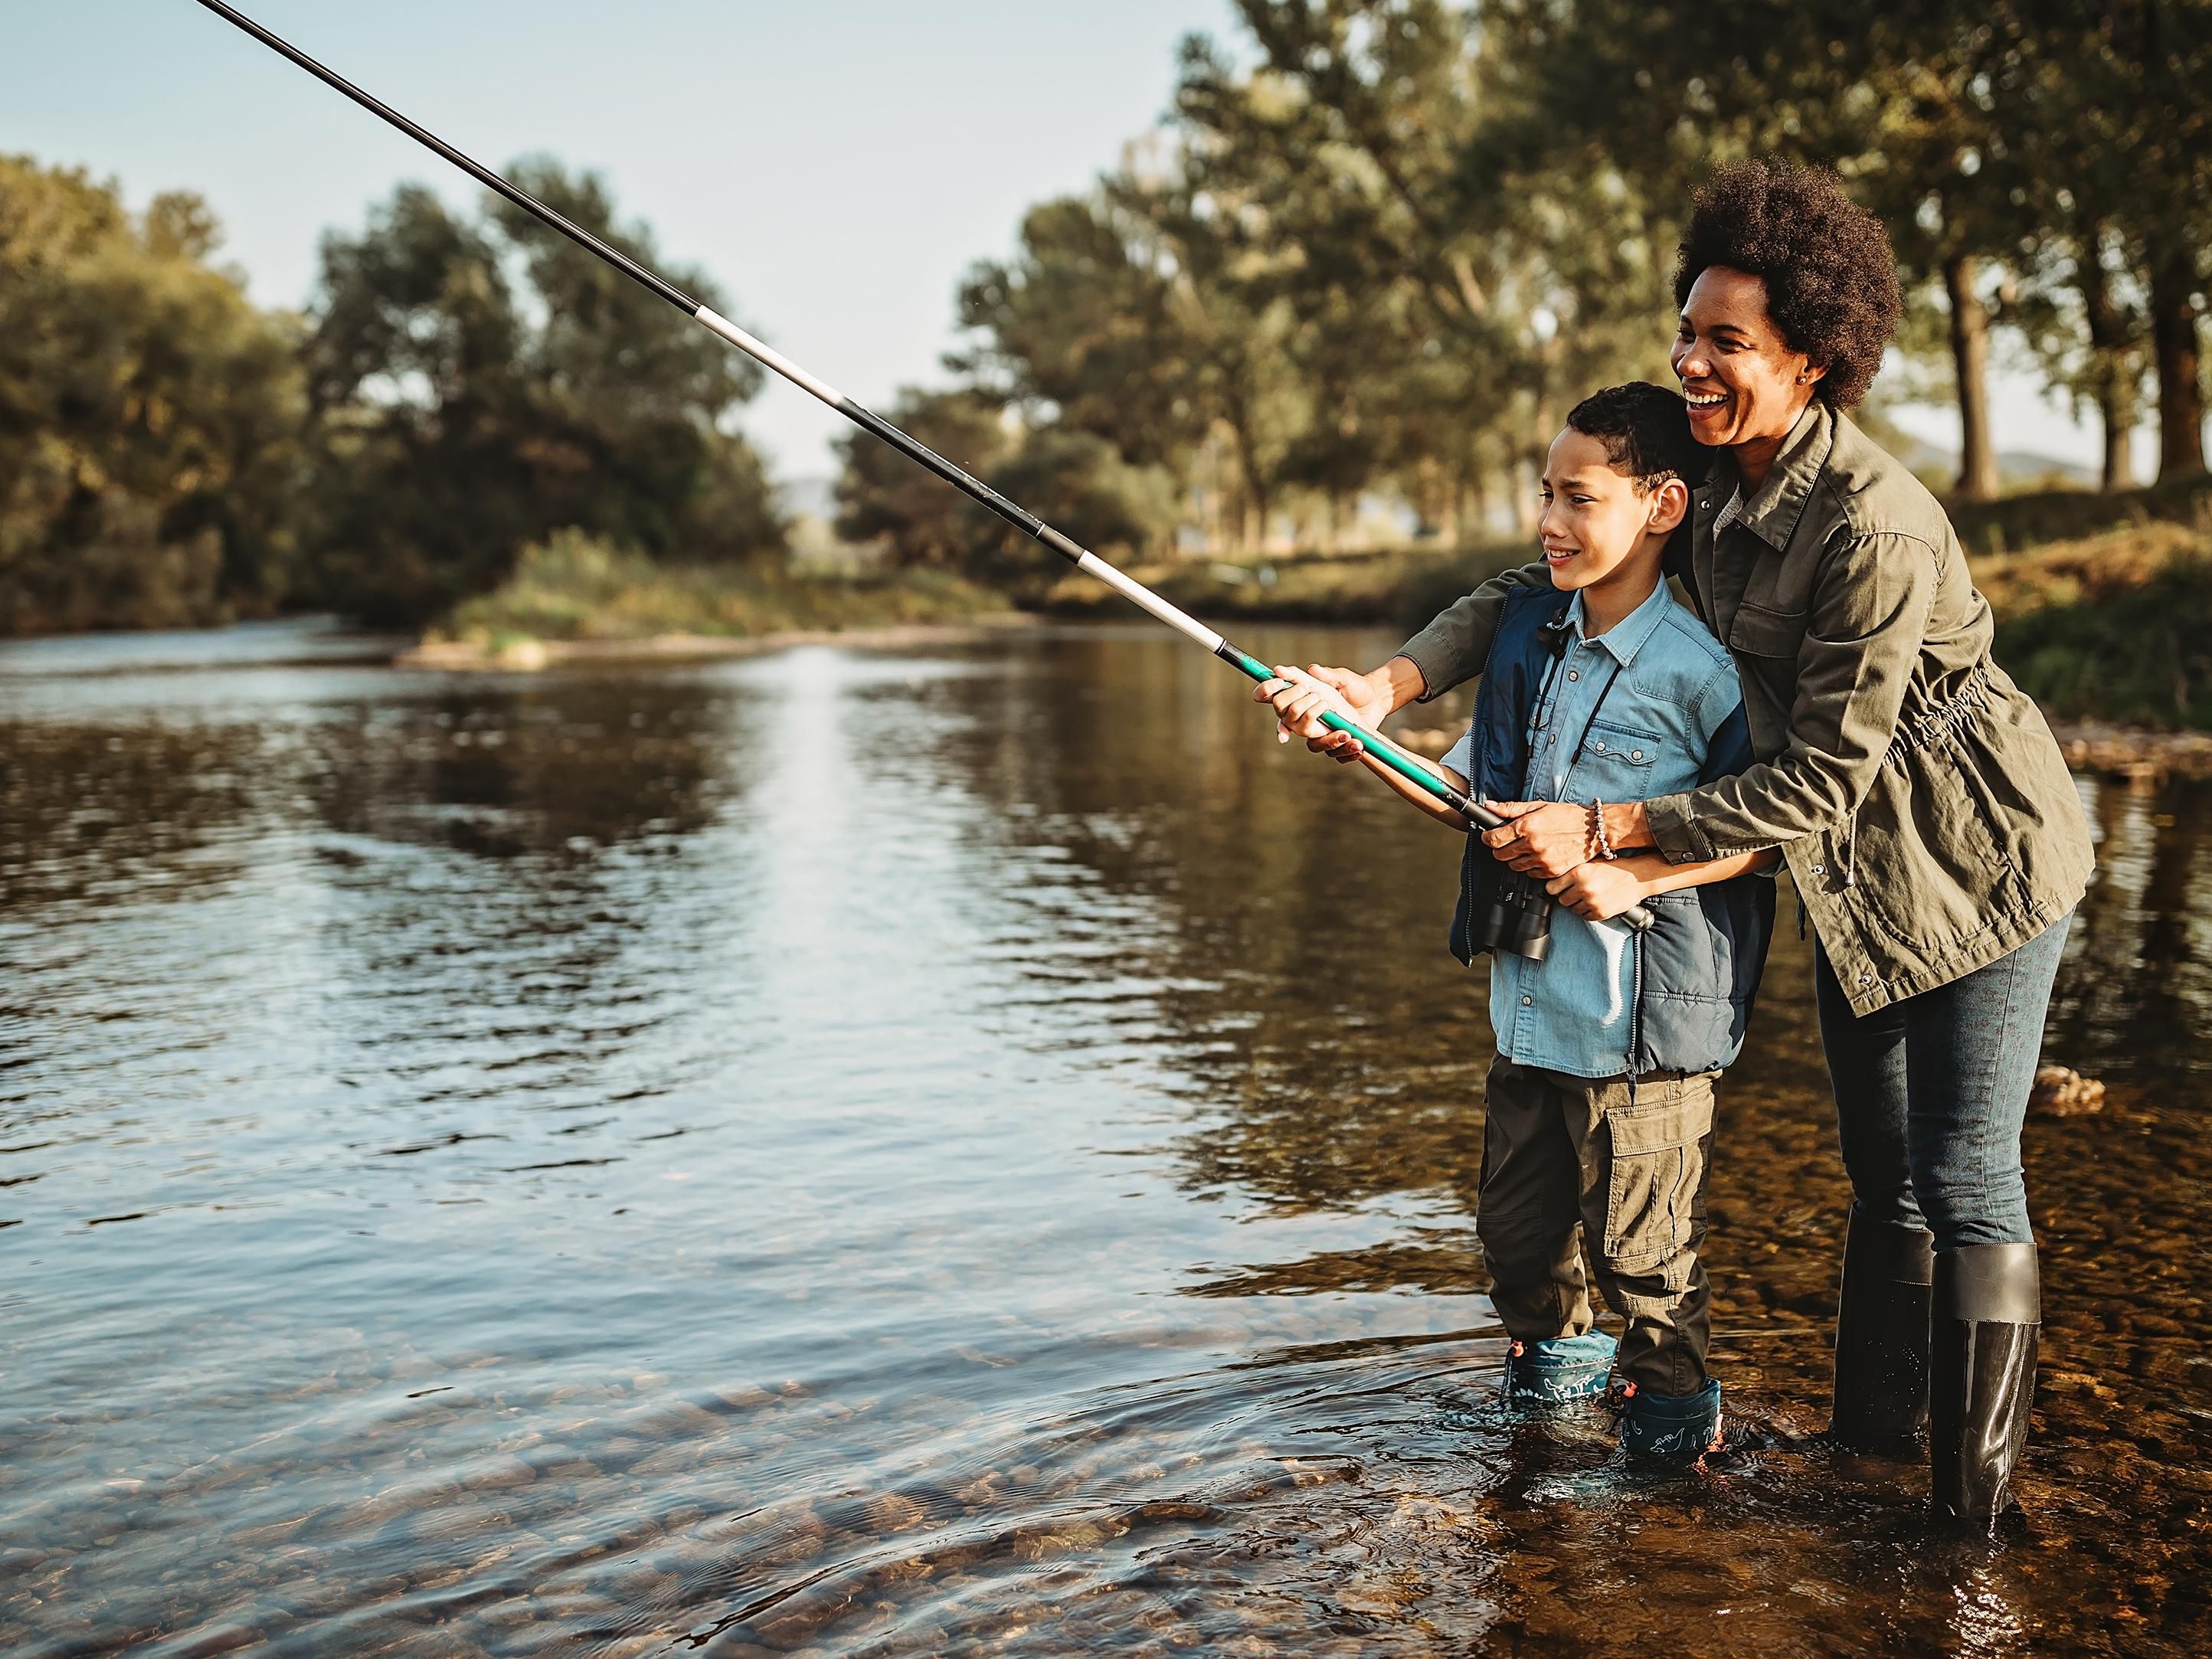 If there's one thing that is abundant in the Steamboat Springs area, it's water! Enjoy the outdoors solo, with family or with one of the local expert guides fishing on one of the many rivers or lakes.